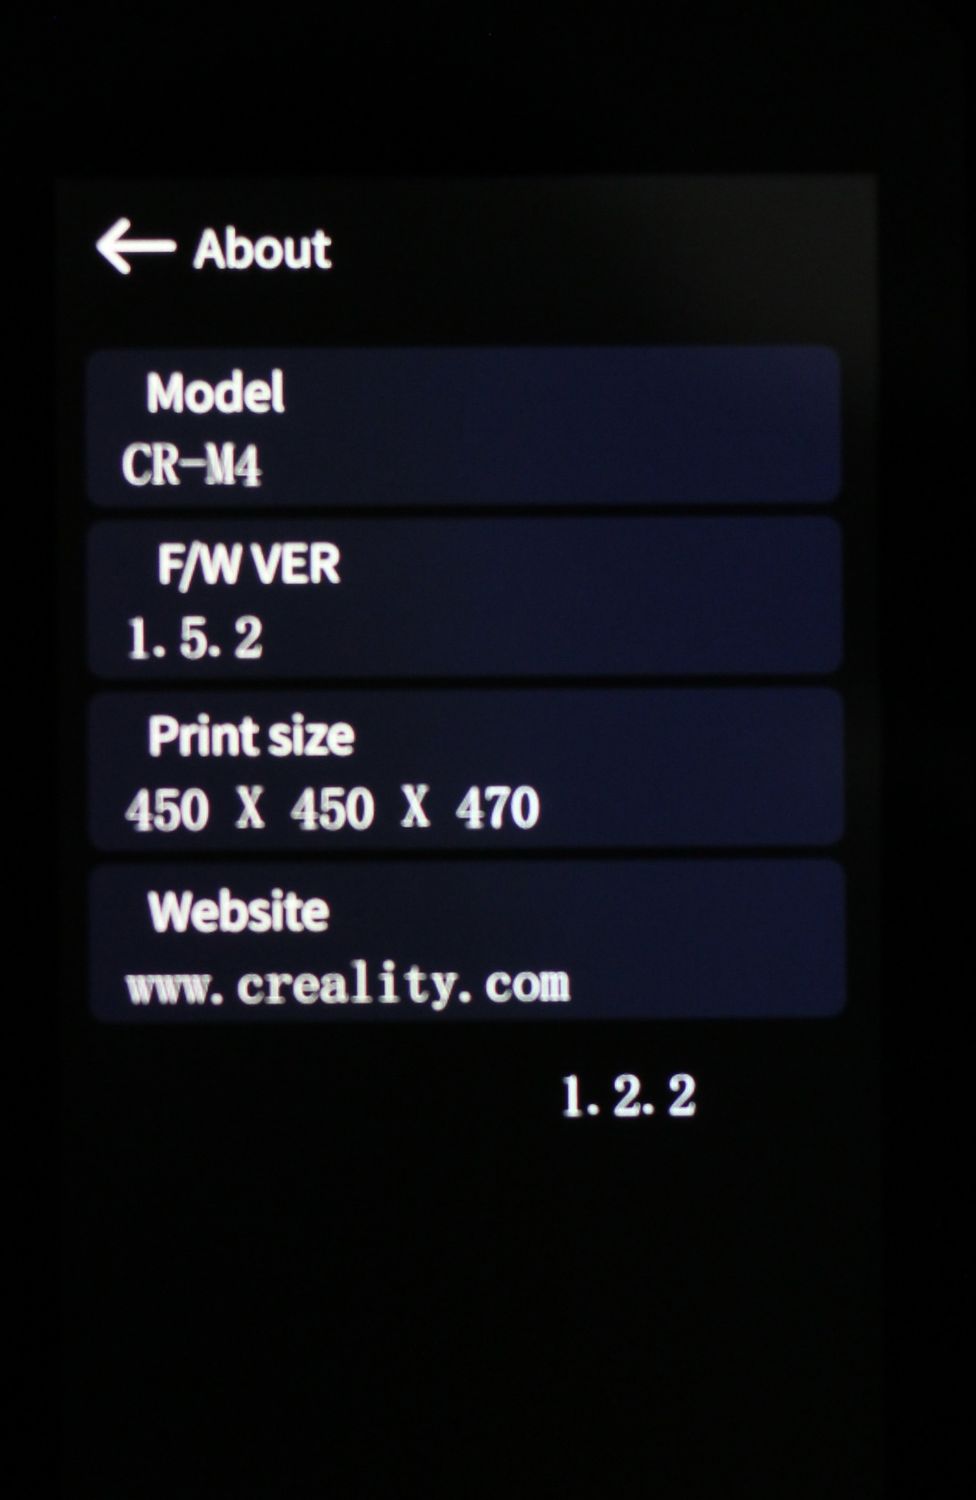 Creality CR M4 Review Screen Interface10 | Creality CR-M4 Review: Large Format 3D Printer